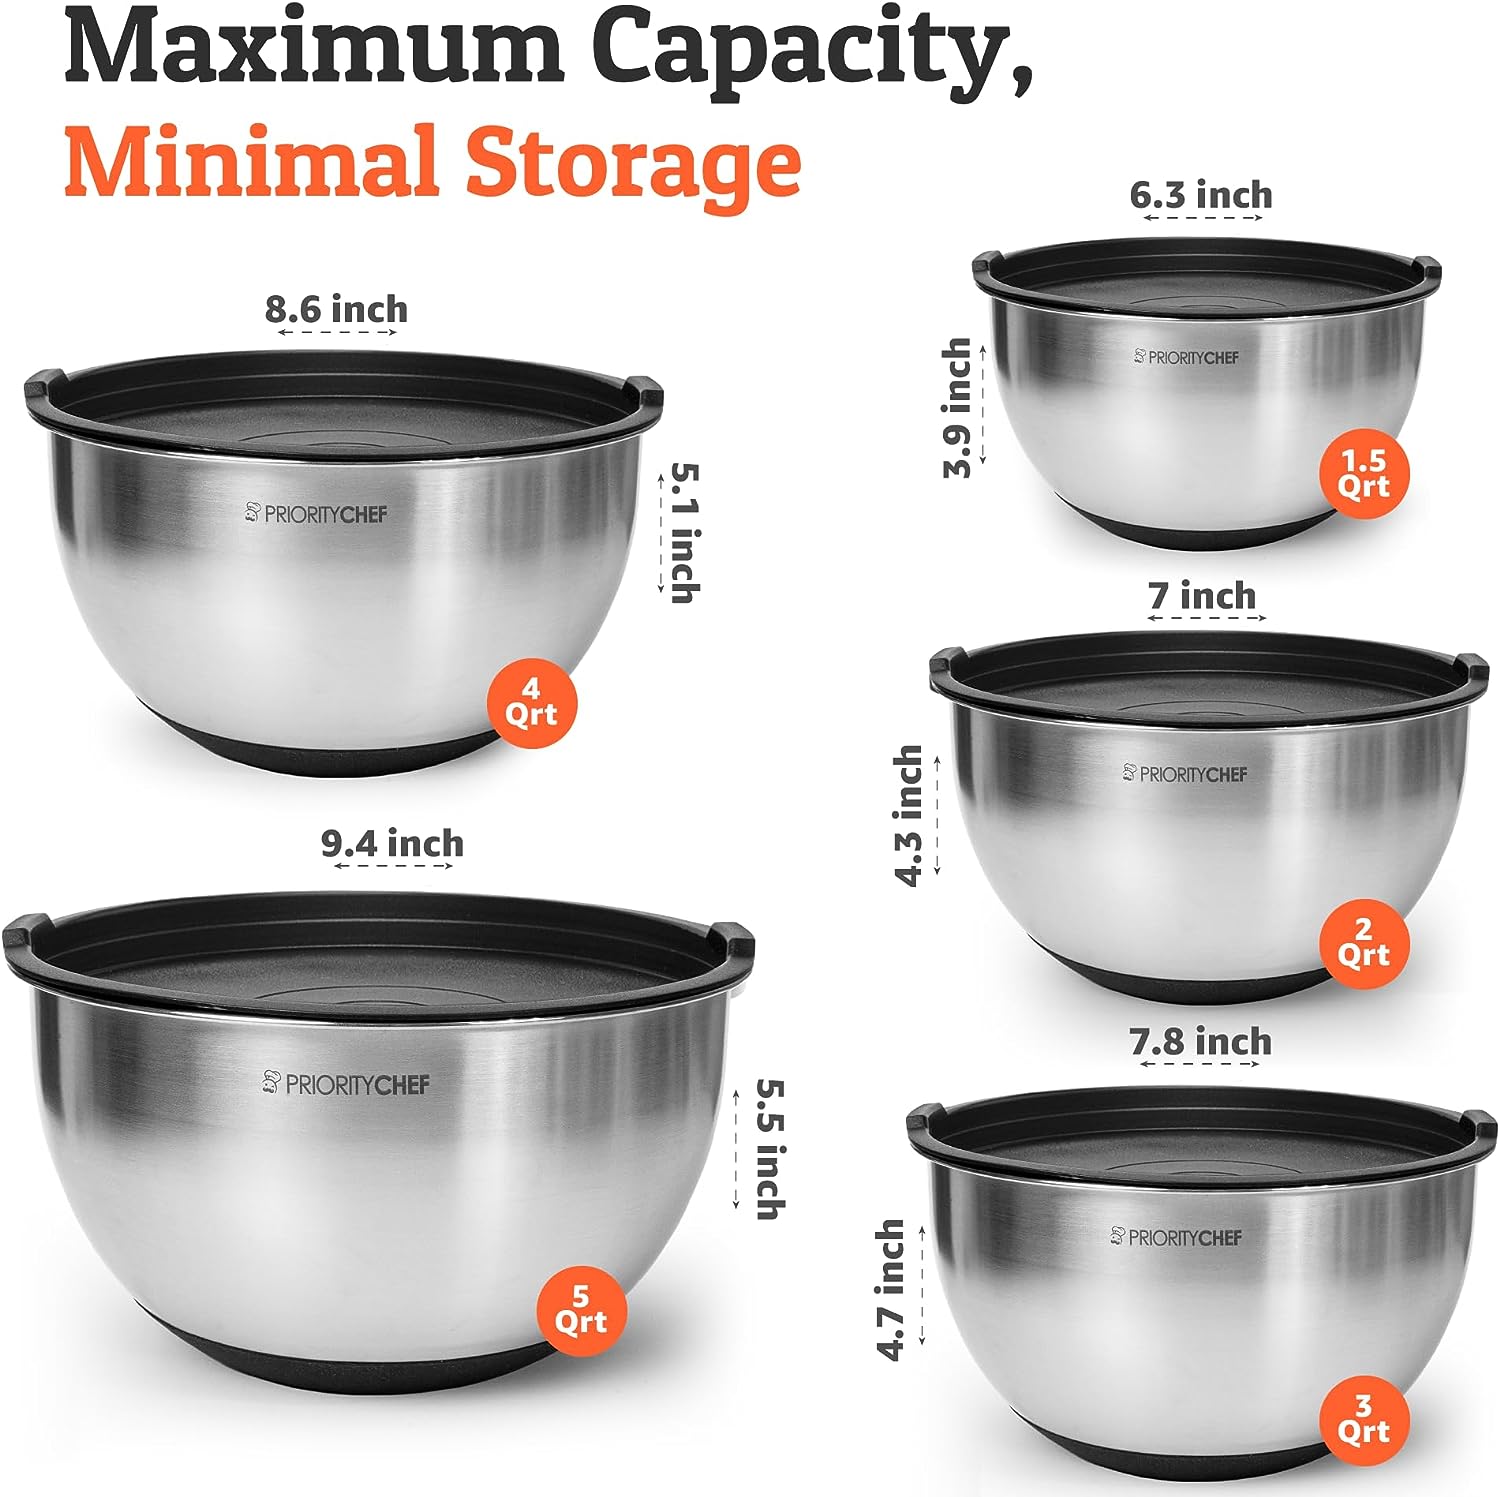 Priority Chef Premium Mixing Bowls With Lids Set, Thicker Stainless Steel Mixing  Bowl Set, Large Prep Metal Bowls with Lids, Nesting Bowls for Kitchen,  1.5/2/3/4/5 Qrt, Black